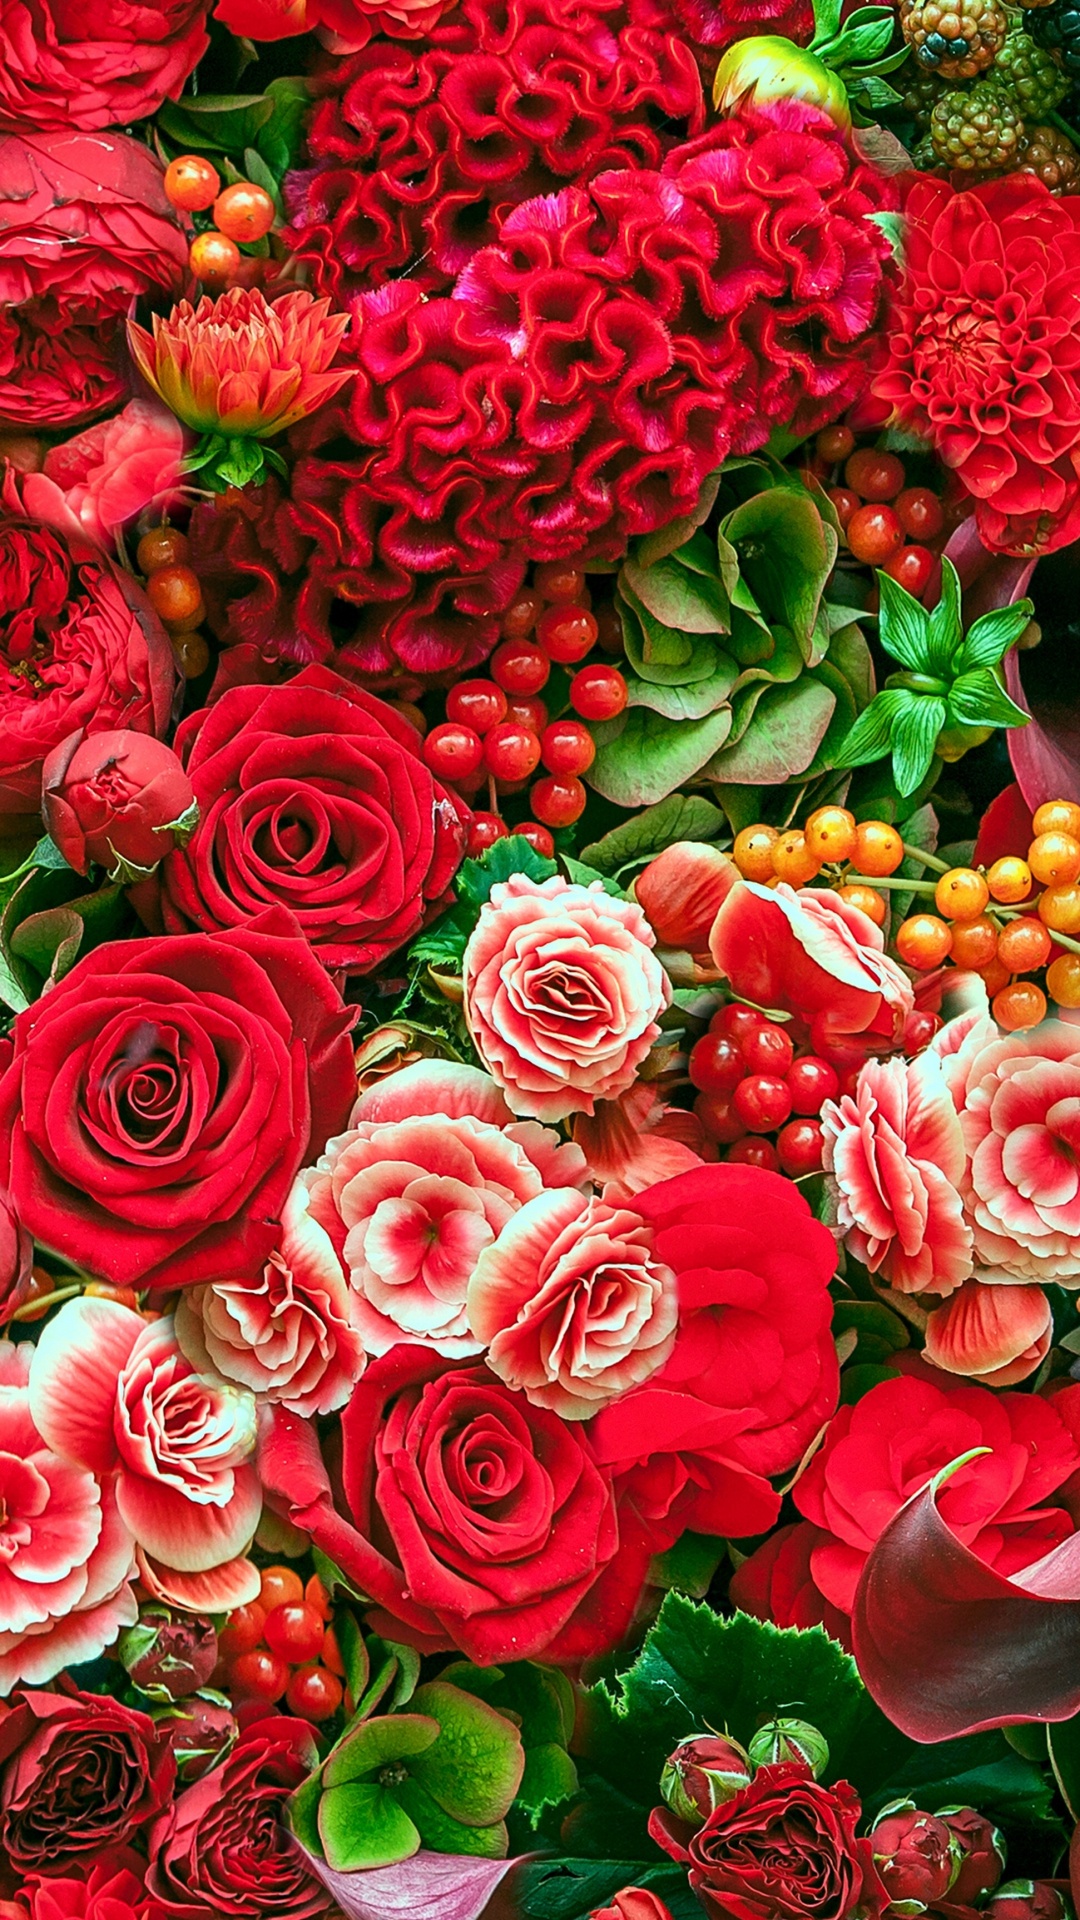 Red Roses With Green Leaves. Wallpaper in 1080x1920 Resolution